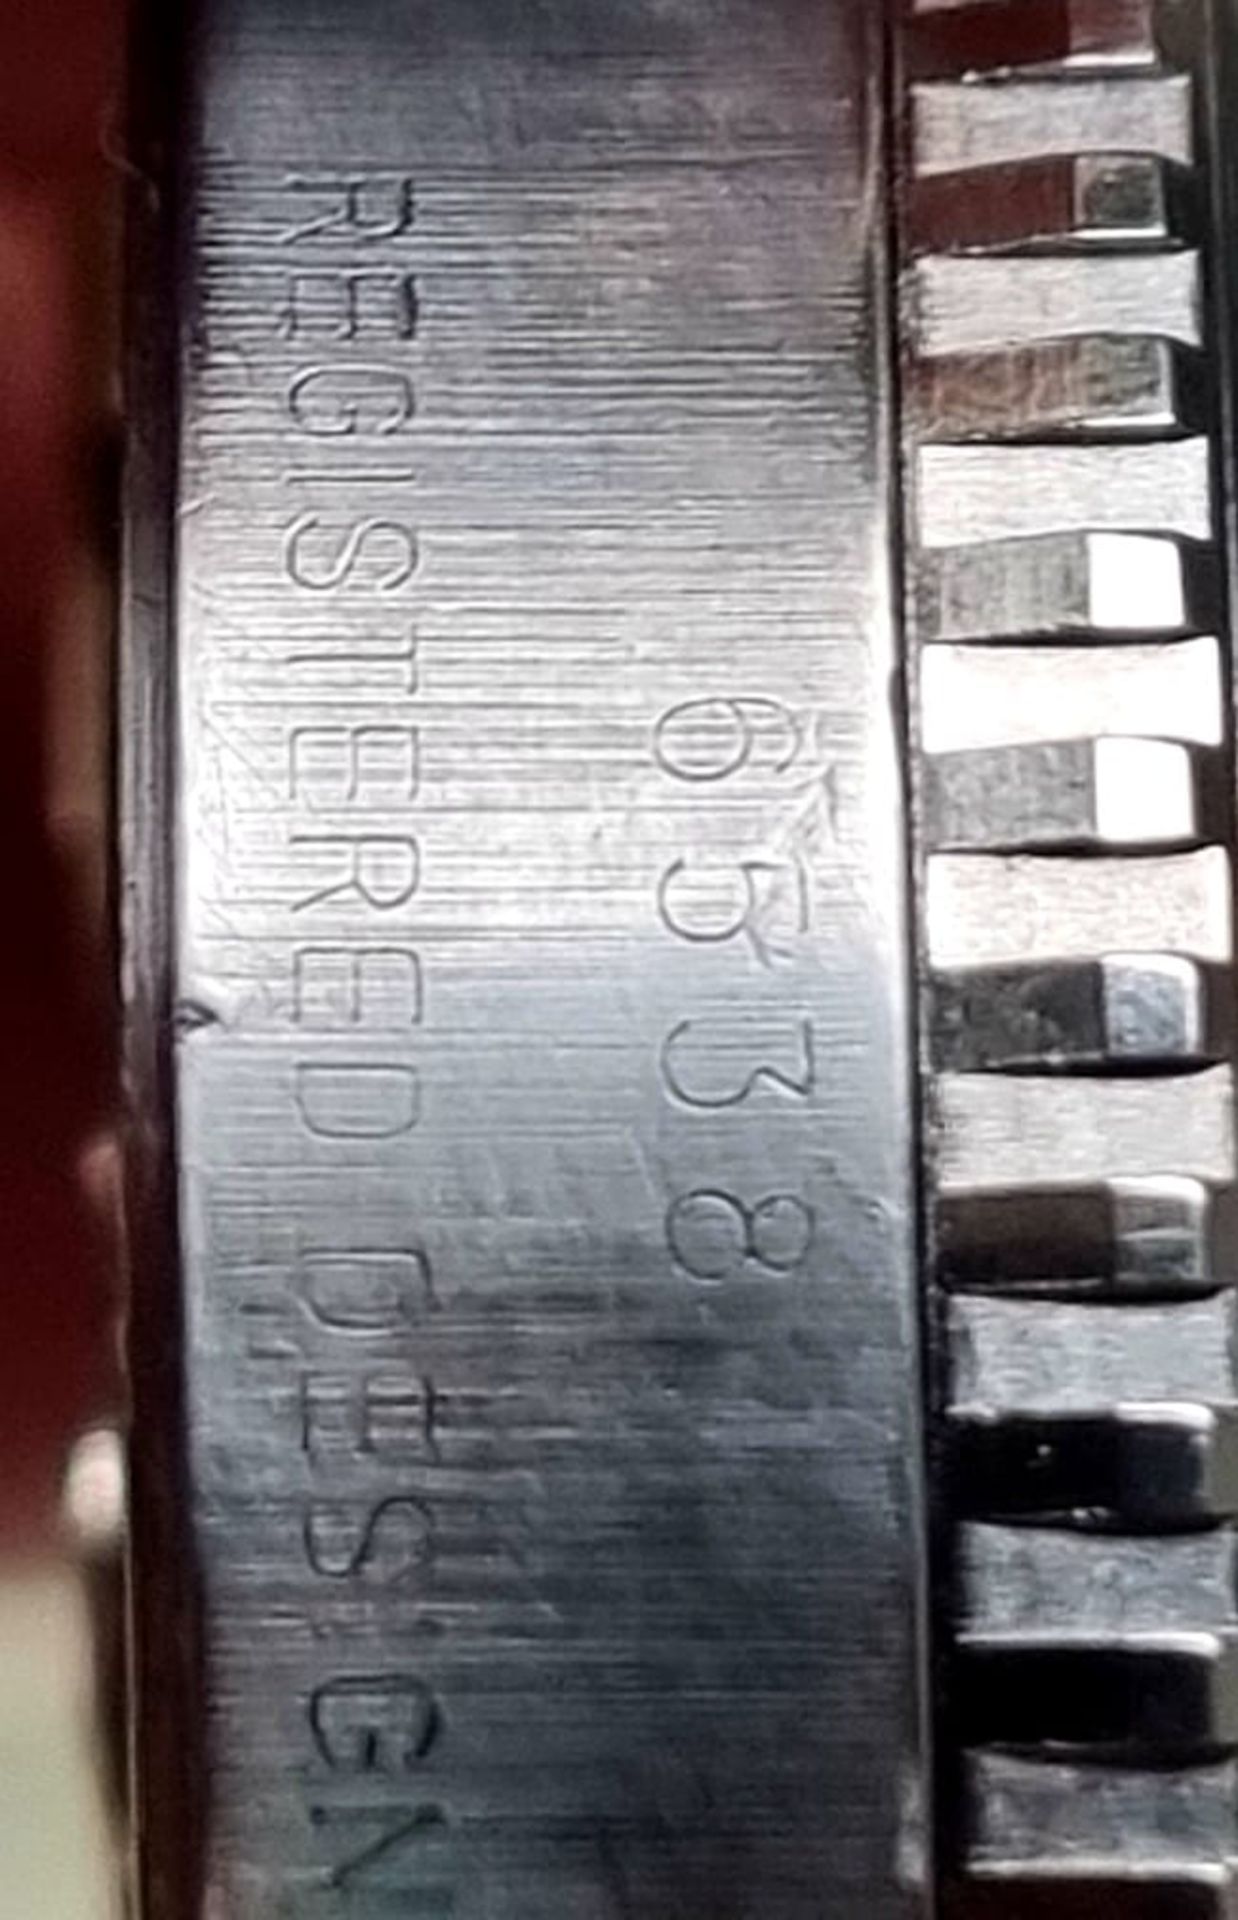 Rolex SUBMARINER, production year 1959 reference 6538, big brown red triangle James Bond - Image 22 of 26